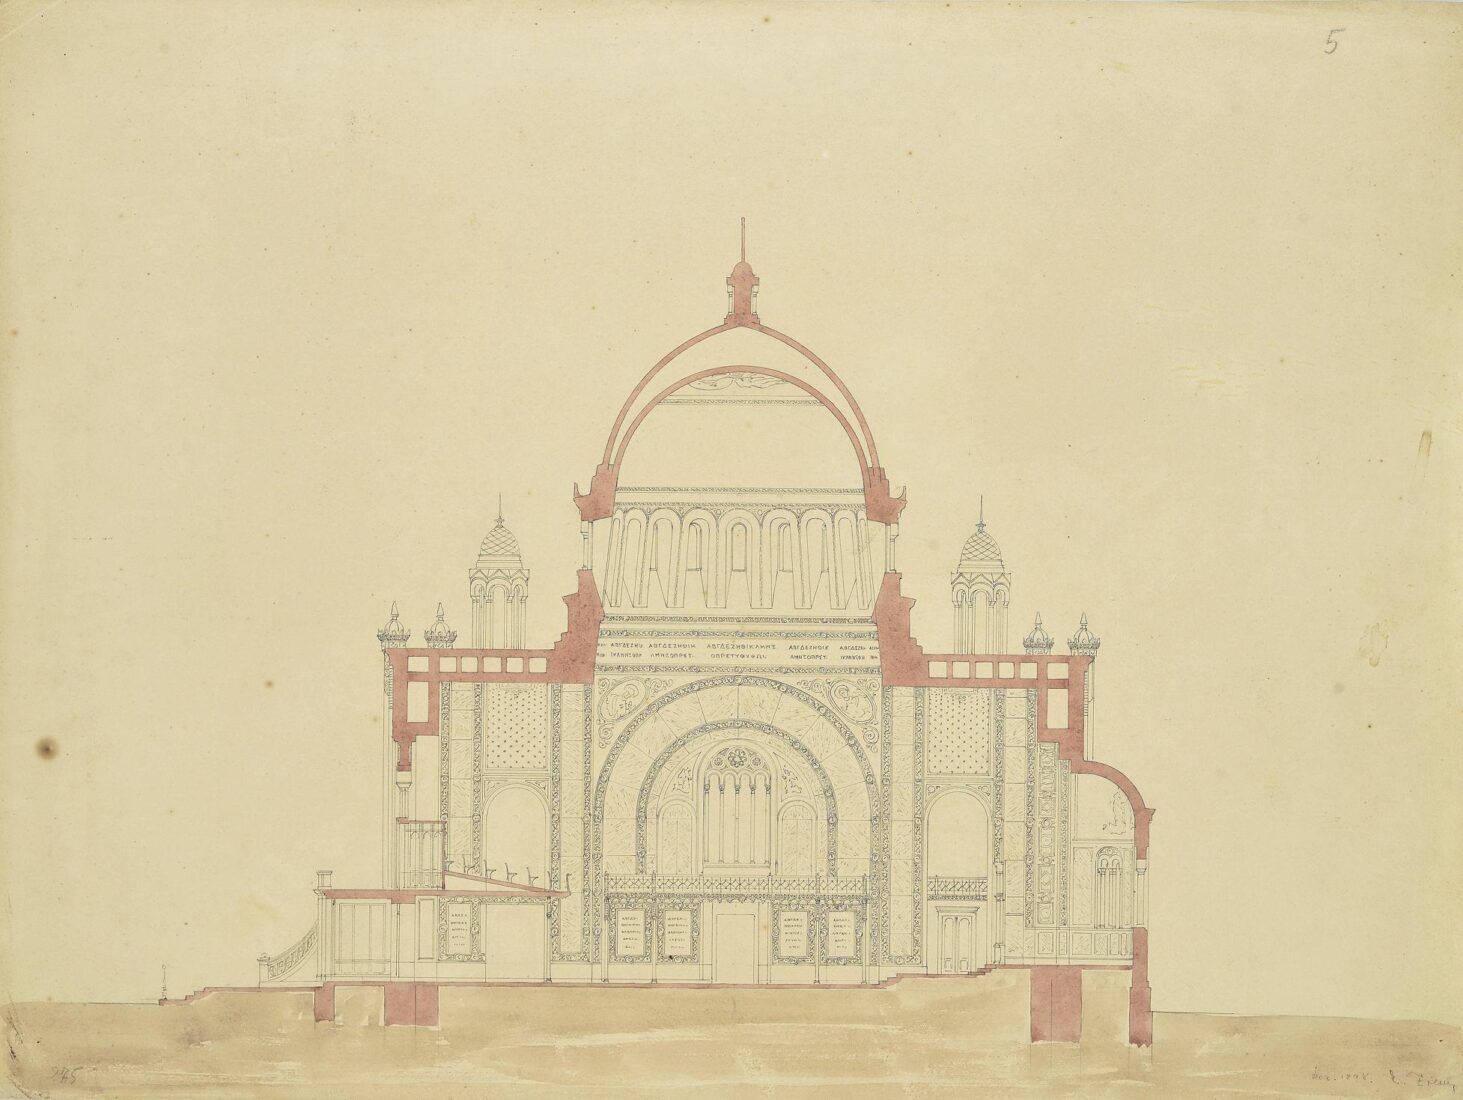 Unknown Church, Probably the Transfiguration Church or St. Saviour, Villia. Longitudinal Section - Ziller Ernst